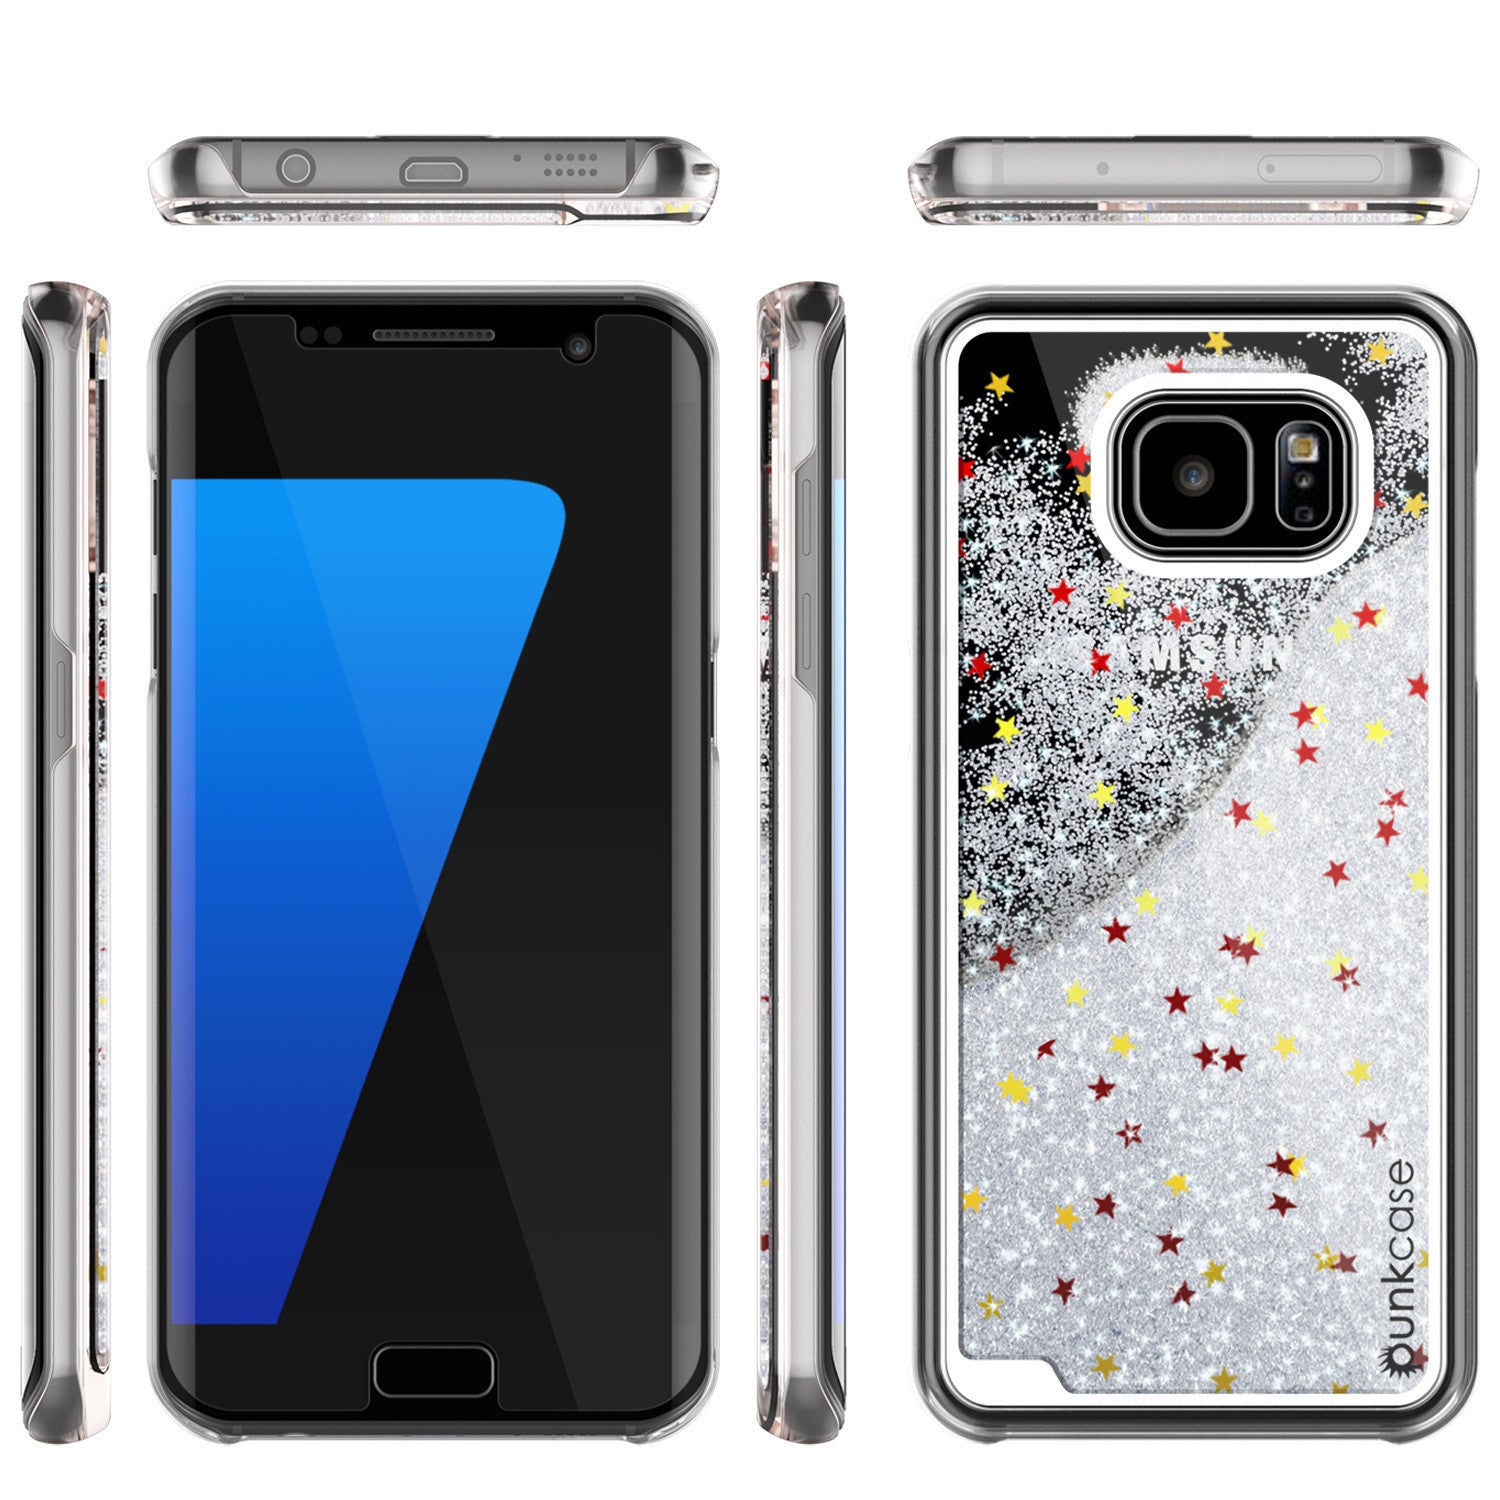 Samsung Galaxy S7 Edge Case, Punkcase [Liquid Silver Series] Protective Dual Layer Floating Glitter Cover + PunkShield Screen Protector